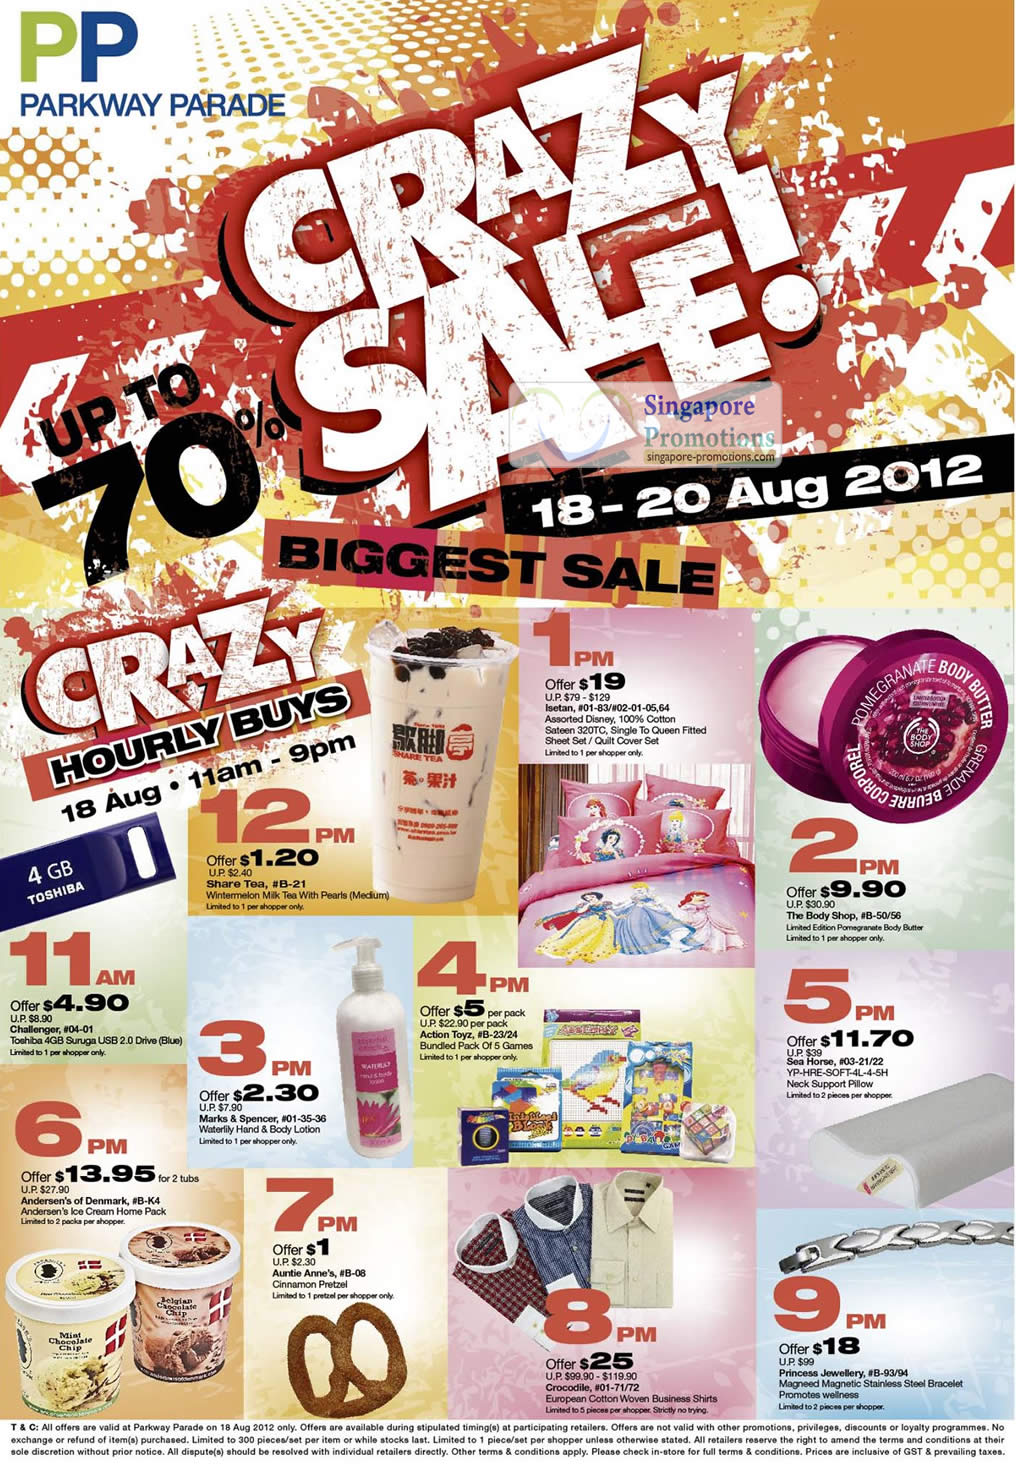 Featured image for Parkway Parade Crazy Sale Up To 70% Off 18 - 20 Aug 2012